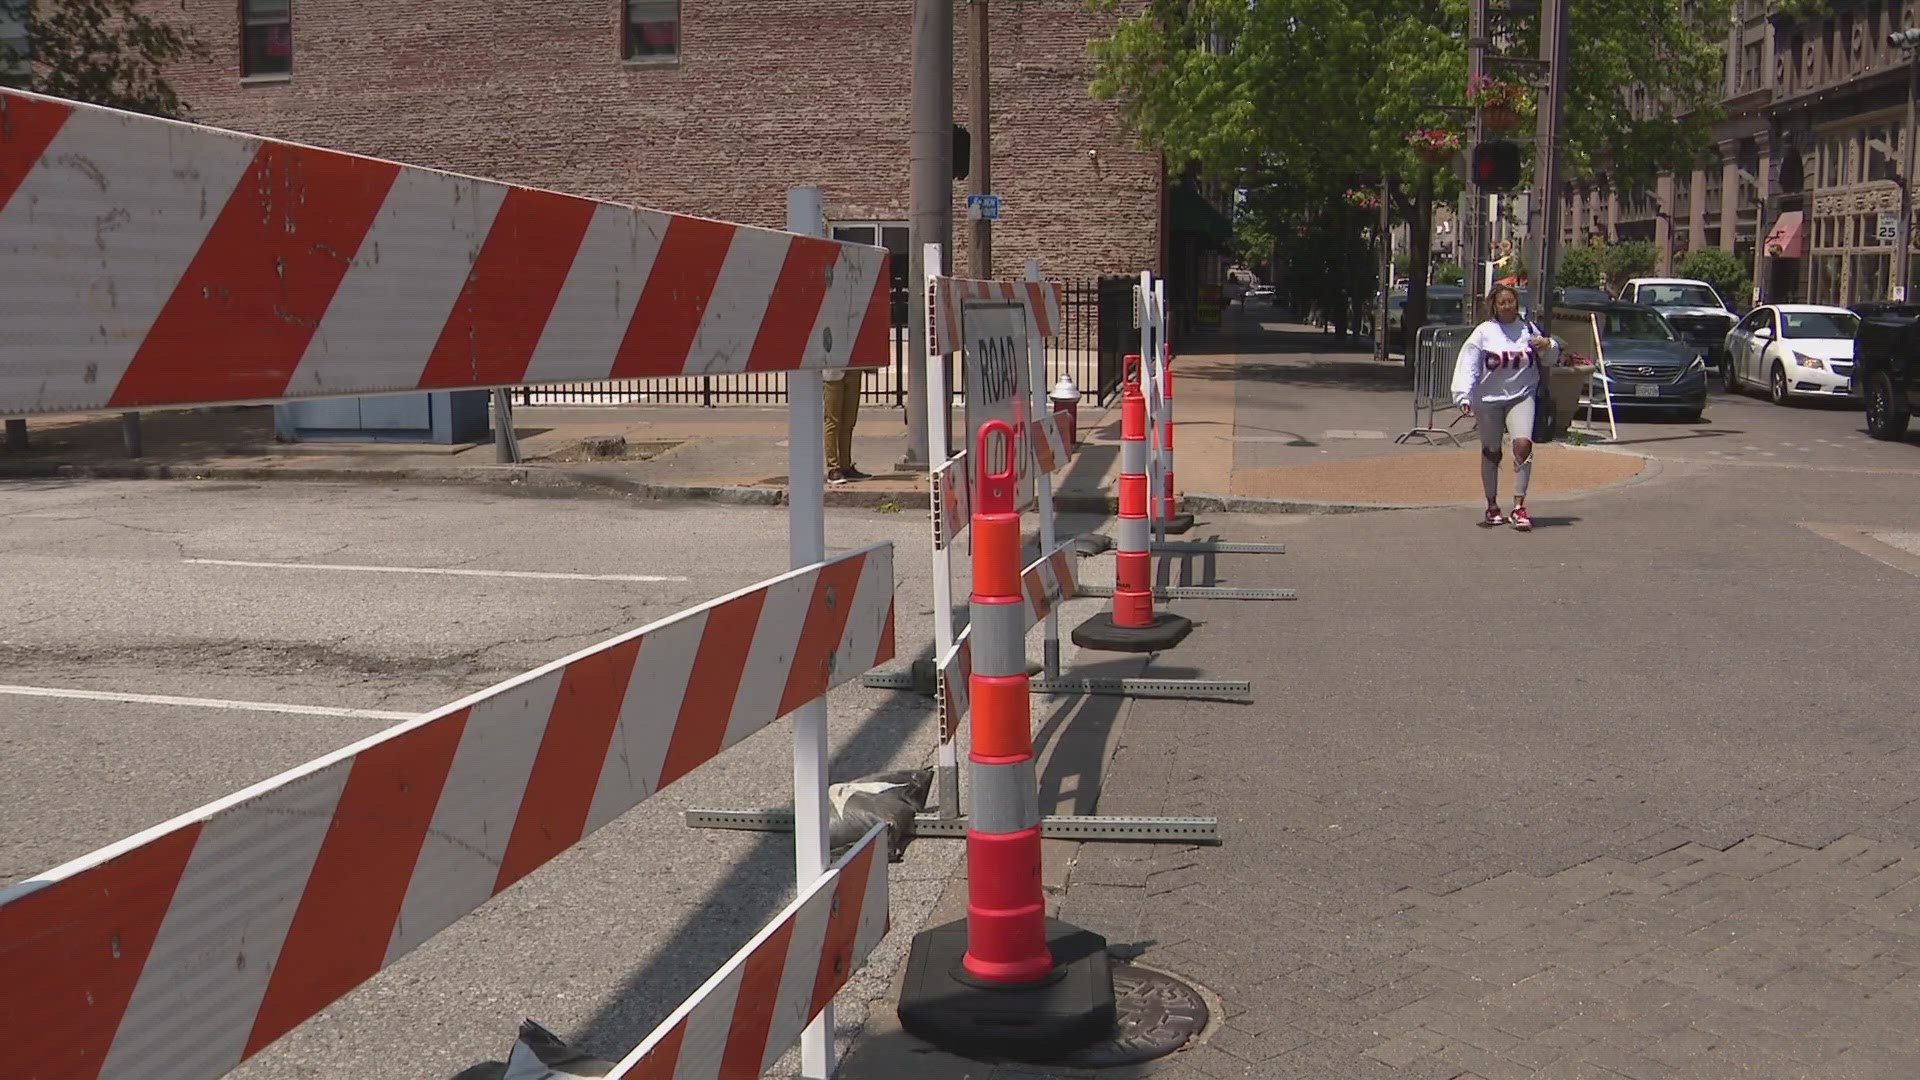 Businesses on Washington Avenue in St. Louis struggling with new summer security measures. While street barriers help control crime, it's bad for business.